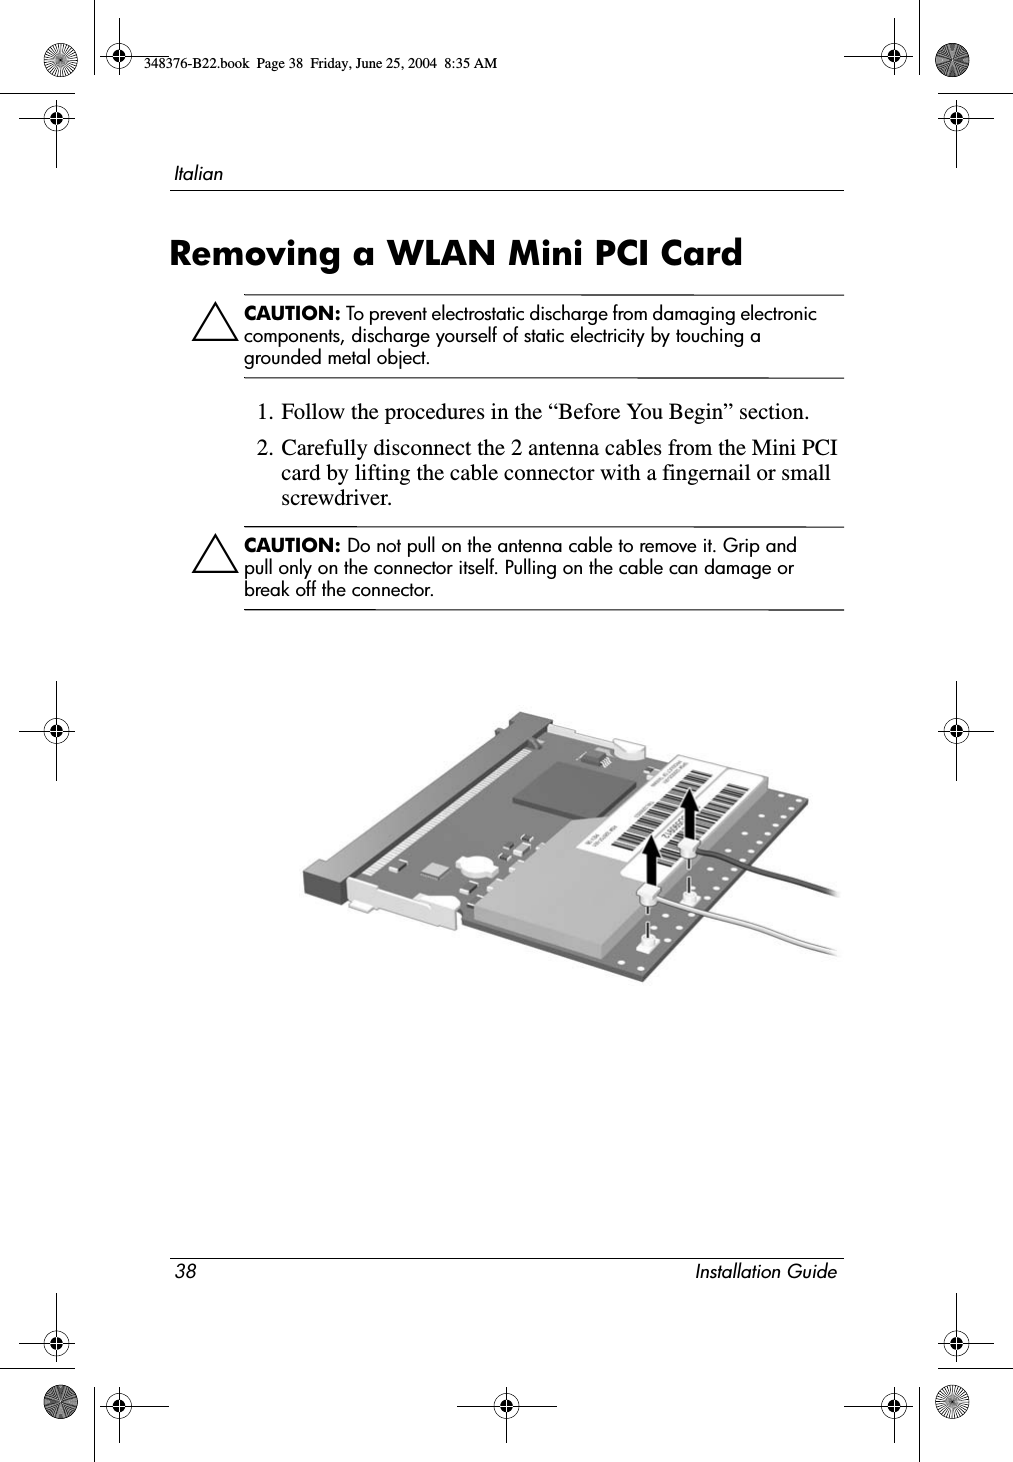 38 Installation GuideItalianRemoving a WLAN Mini PCI CardÄCAUTION: To prevent electrostatic discharge from damaging electronic components, discharge yourself of static electricity by touching a grounded metal object.1. Follow the procedures in the “Before You Begin” section.2. Carefully disconnect the 2 antenna cables from the Mini PCI card by lifting the cable connector with a fingernail or small screwdriver.ÄCAUTION: Do not pull on the antenna cable to remove it. Grip and pull only on the connector itself. Pulling on the cable can damage or break off the connector.348376-B22.book  Page 38  Friday, June 25, 2004  8:35 AM